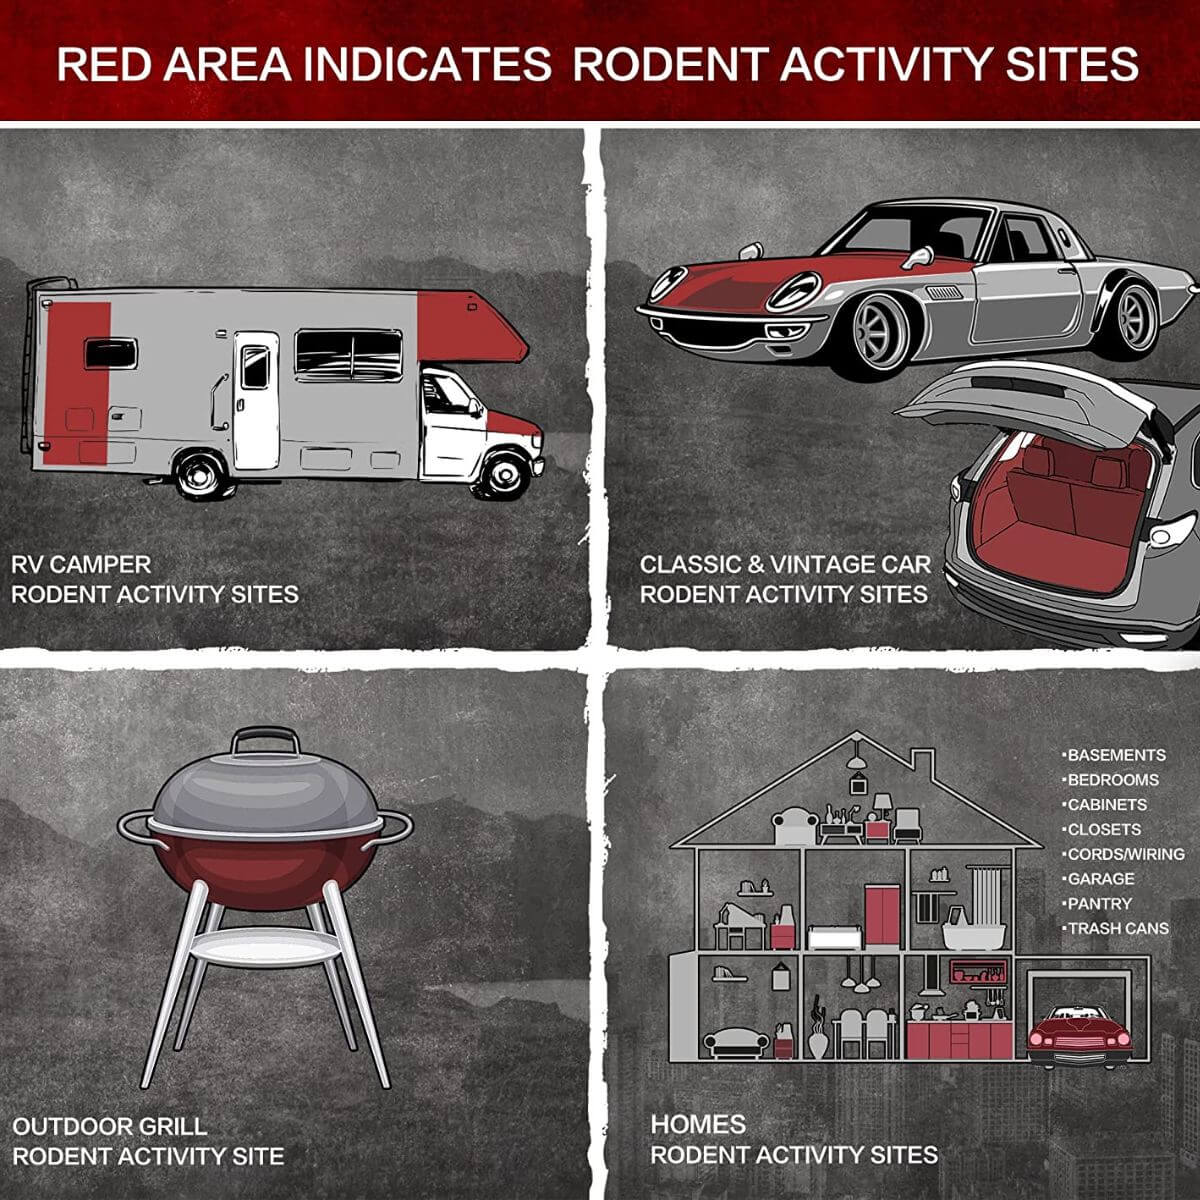 Riddex Home Free Rodent Repellents can be used in an RV, car, grill, home and more